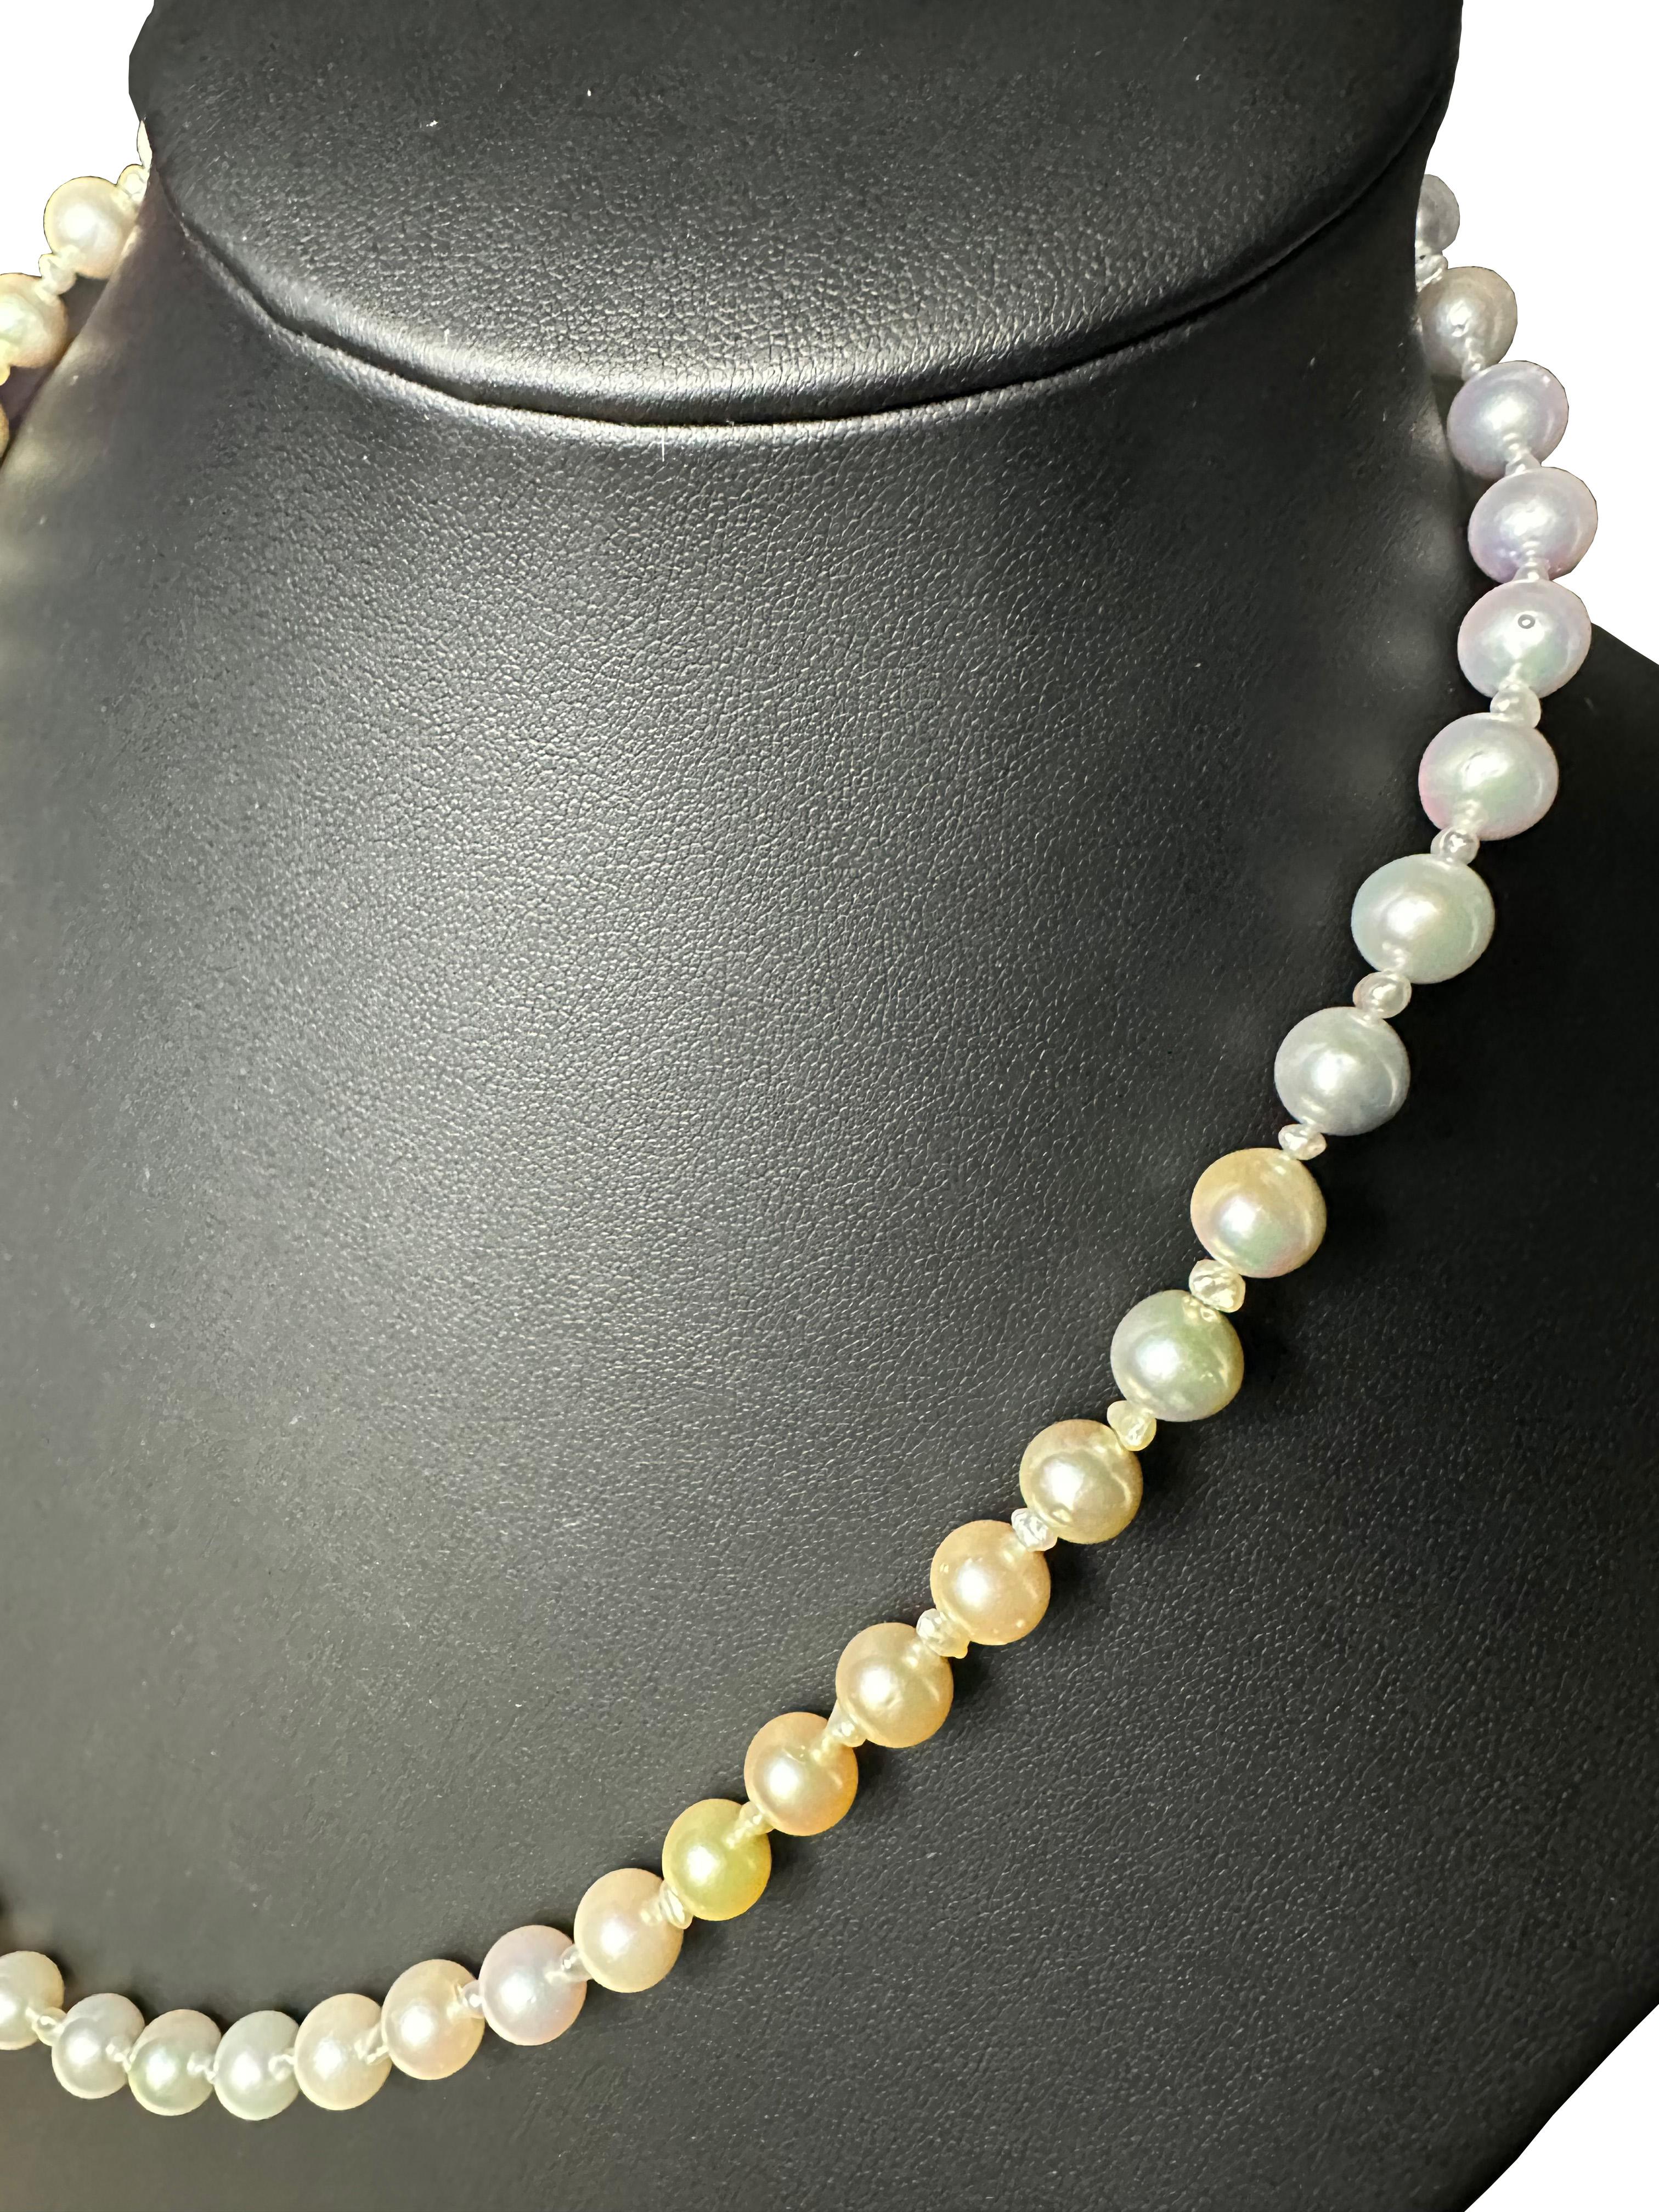 Bead IRIS PARURE, Non Colored&Bleached Japan Pearl, 8.00-8.50mm Akoya Pearl Necklace For Sale